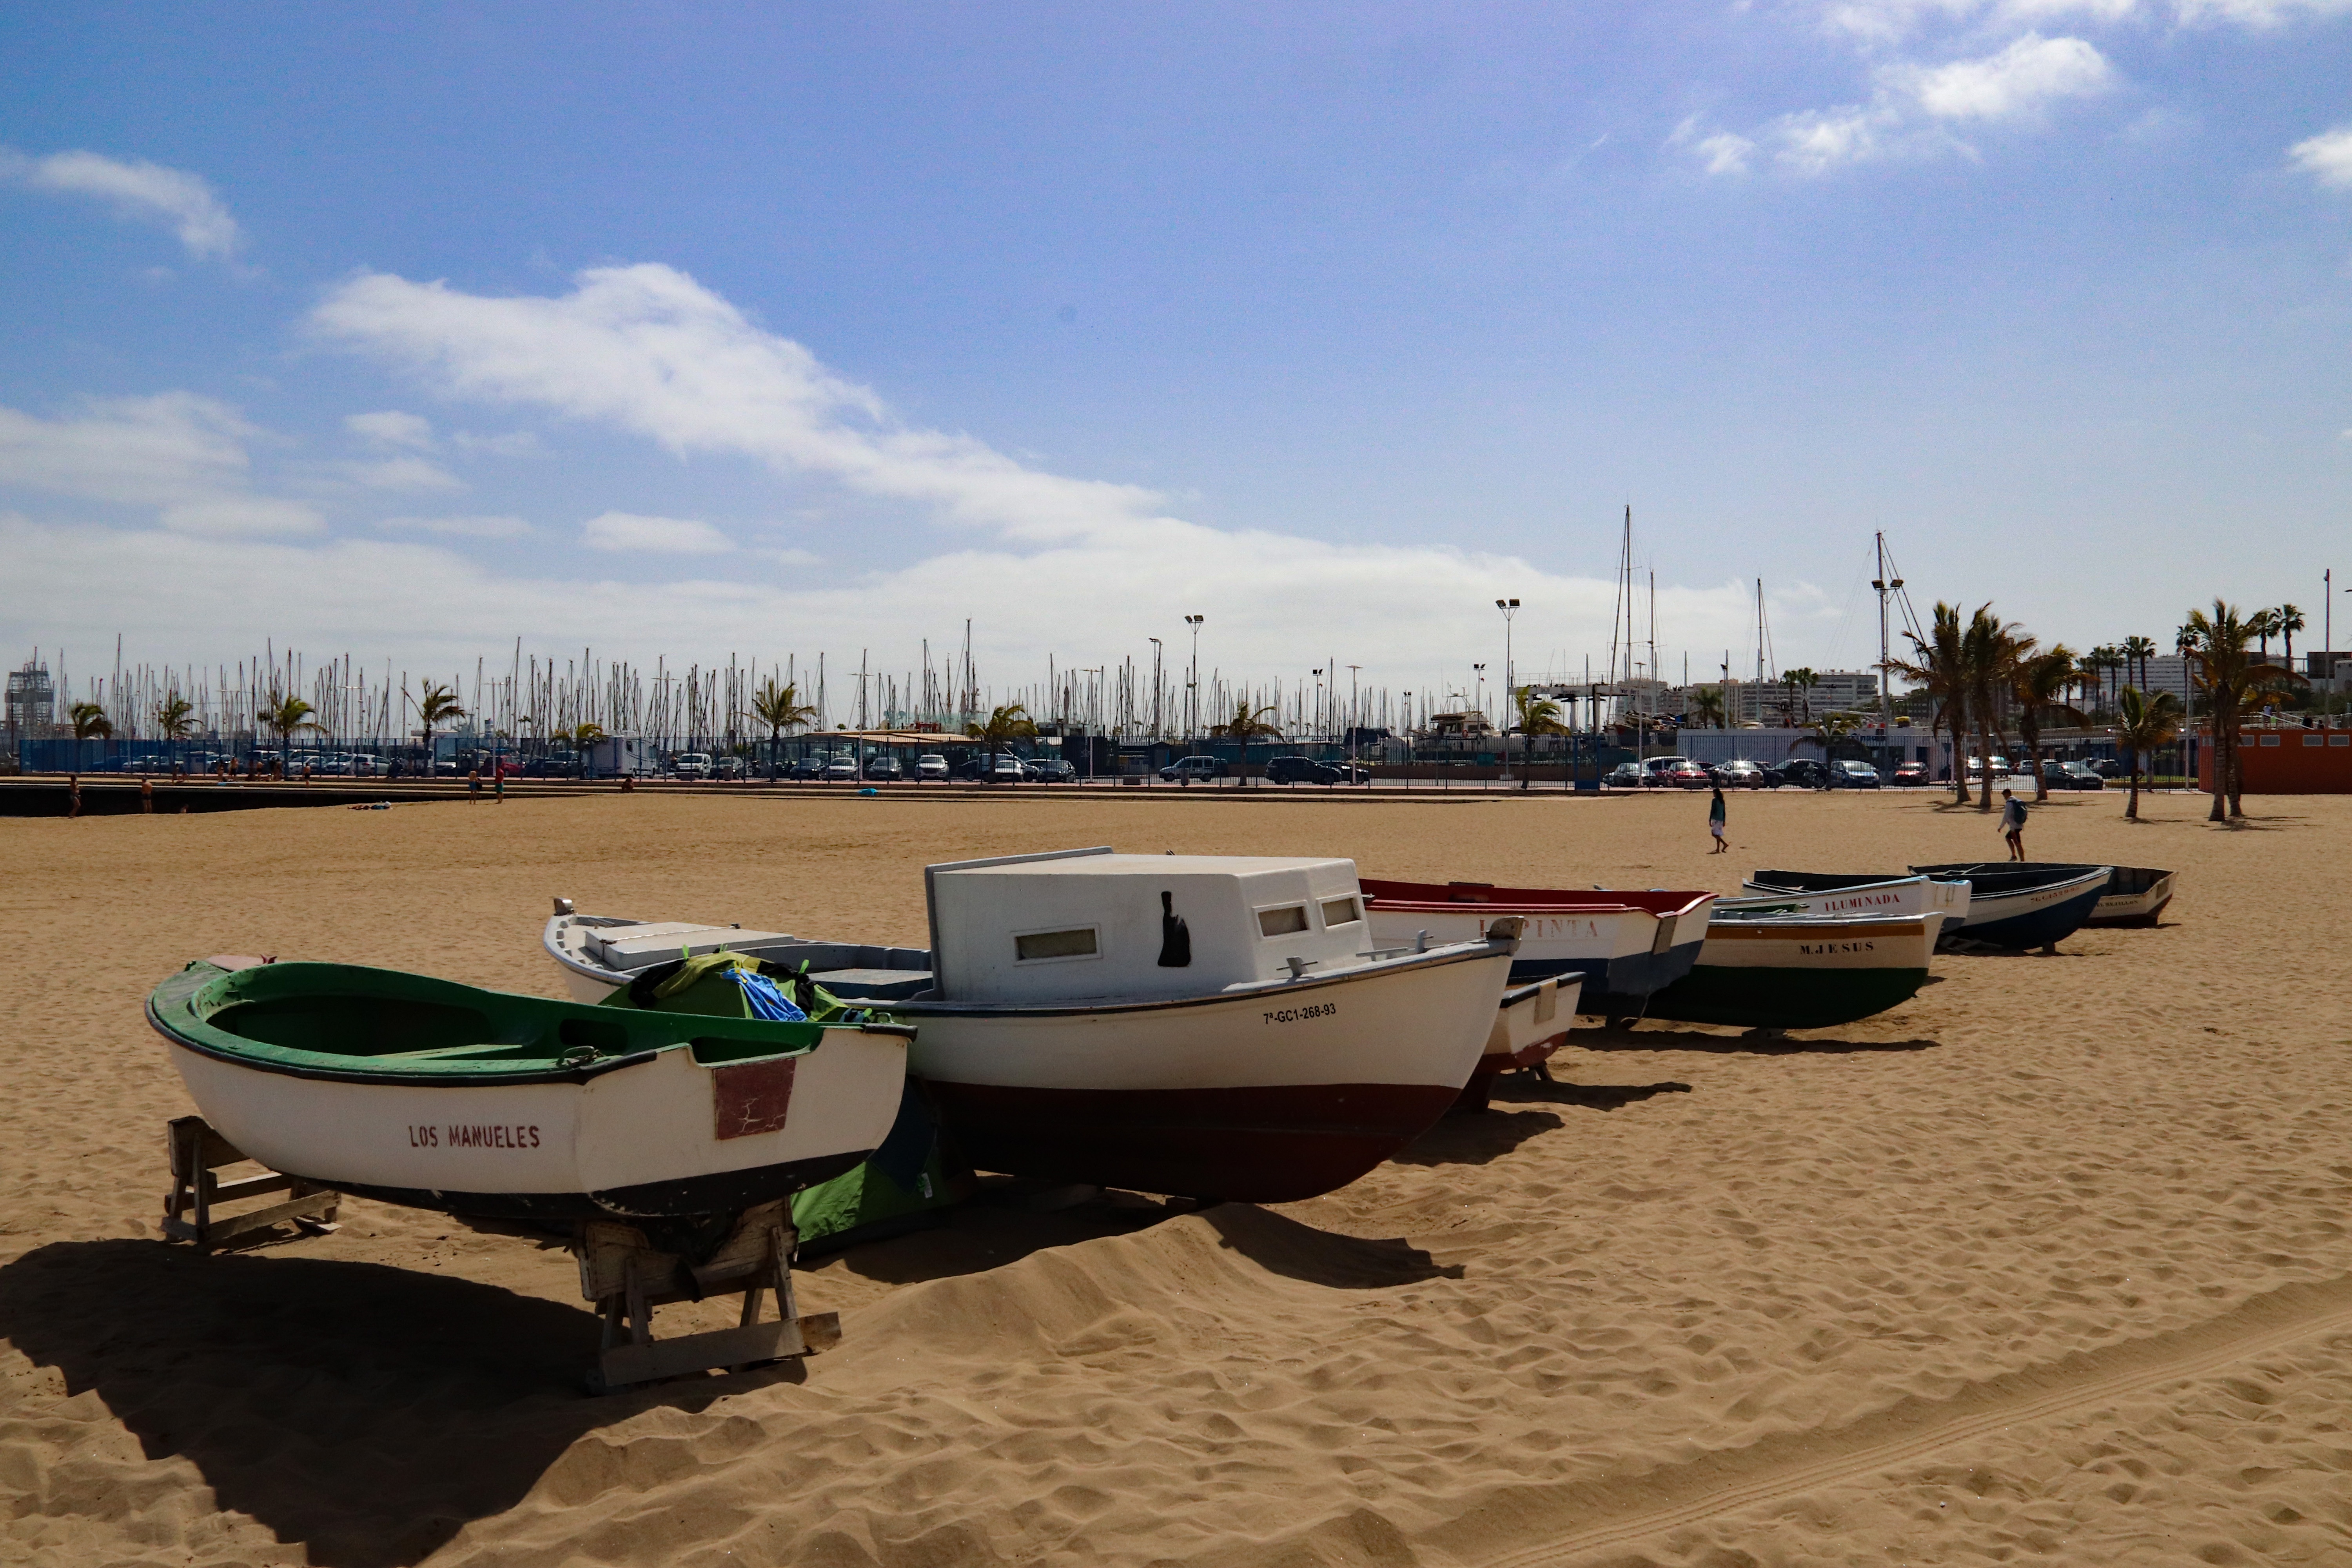 Small fashing boats lined up along the beach in Las Palmas. 